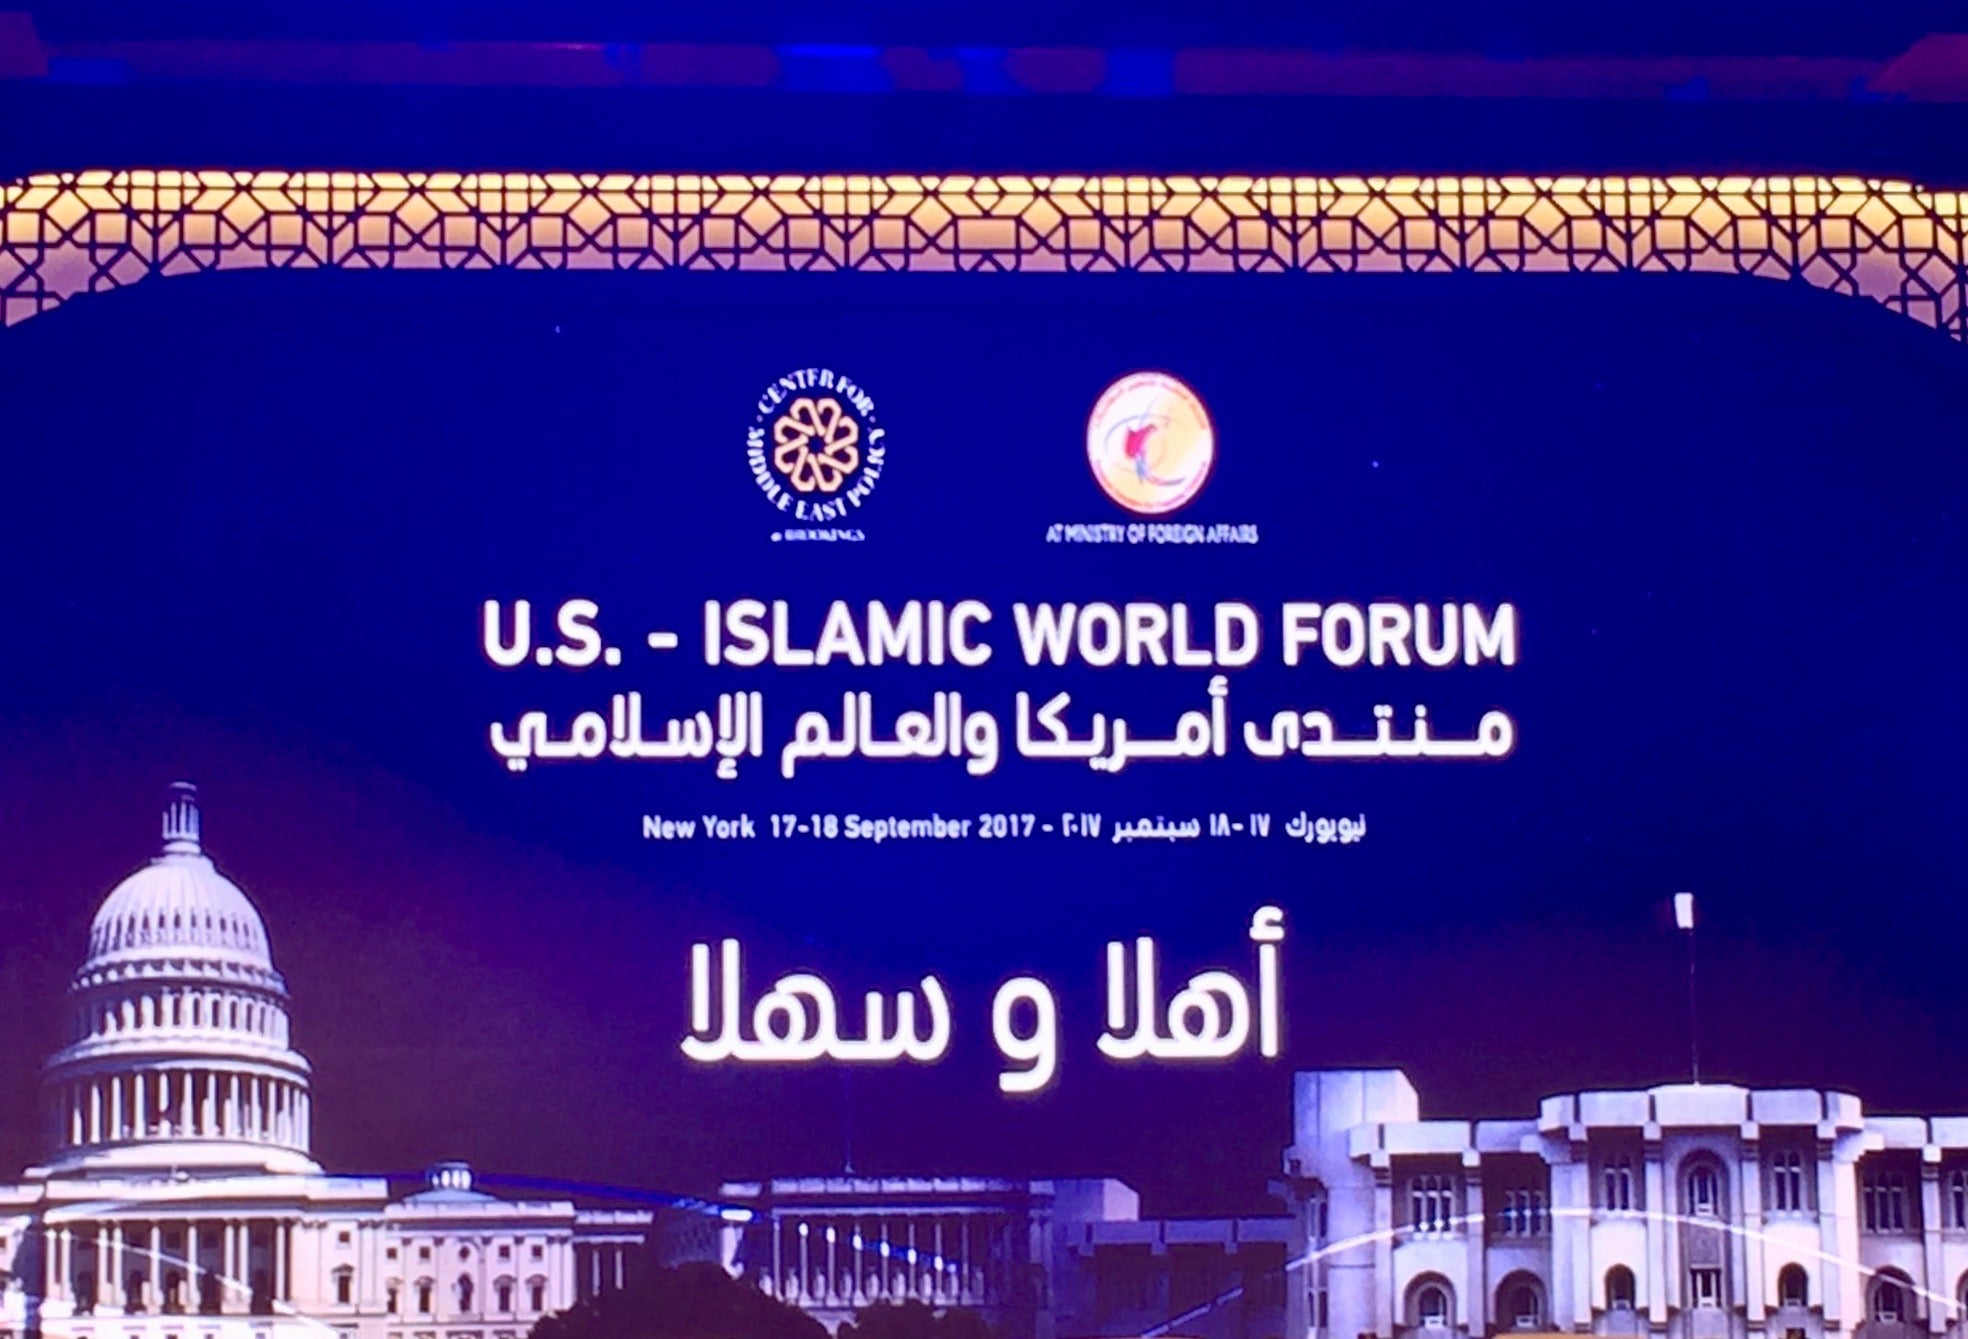 An informational slide reads "US-Islamic World Forum. New York 17-18 September 2017." The slide includes an Arabic translation of the same text.